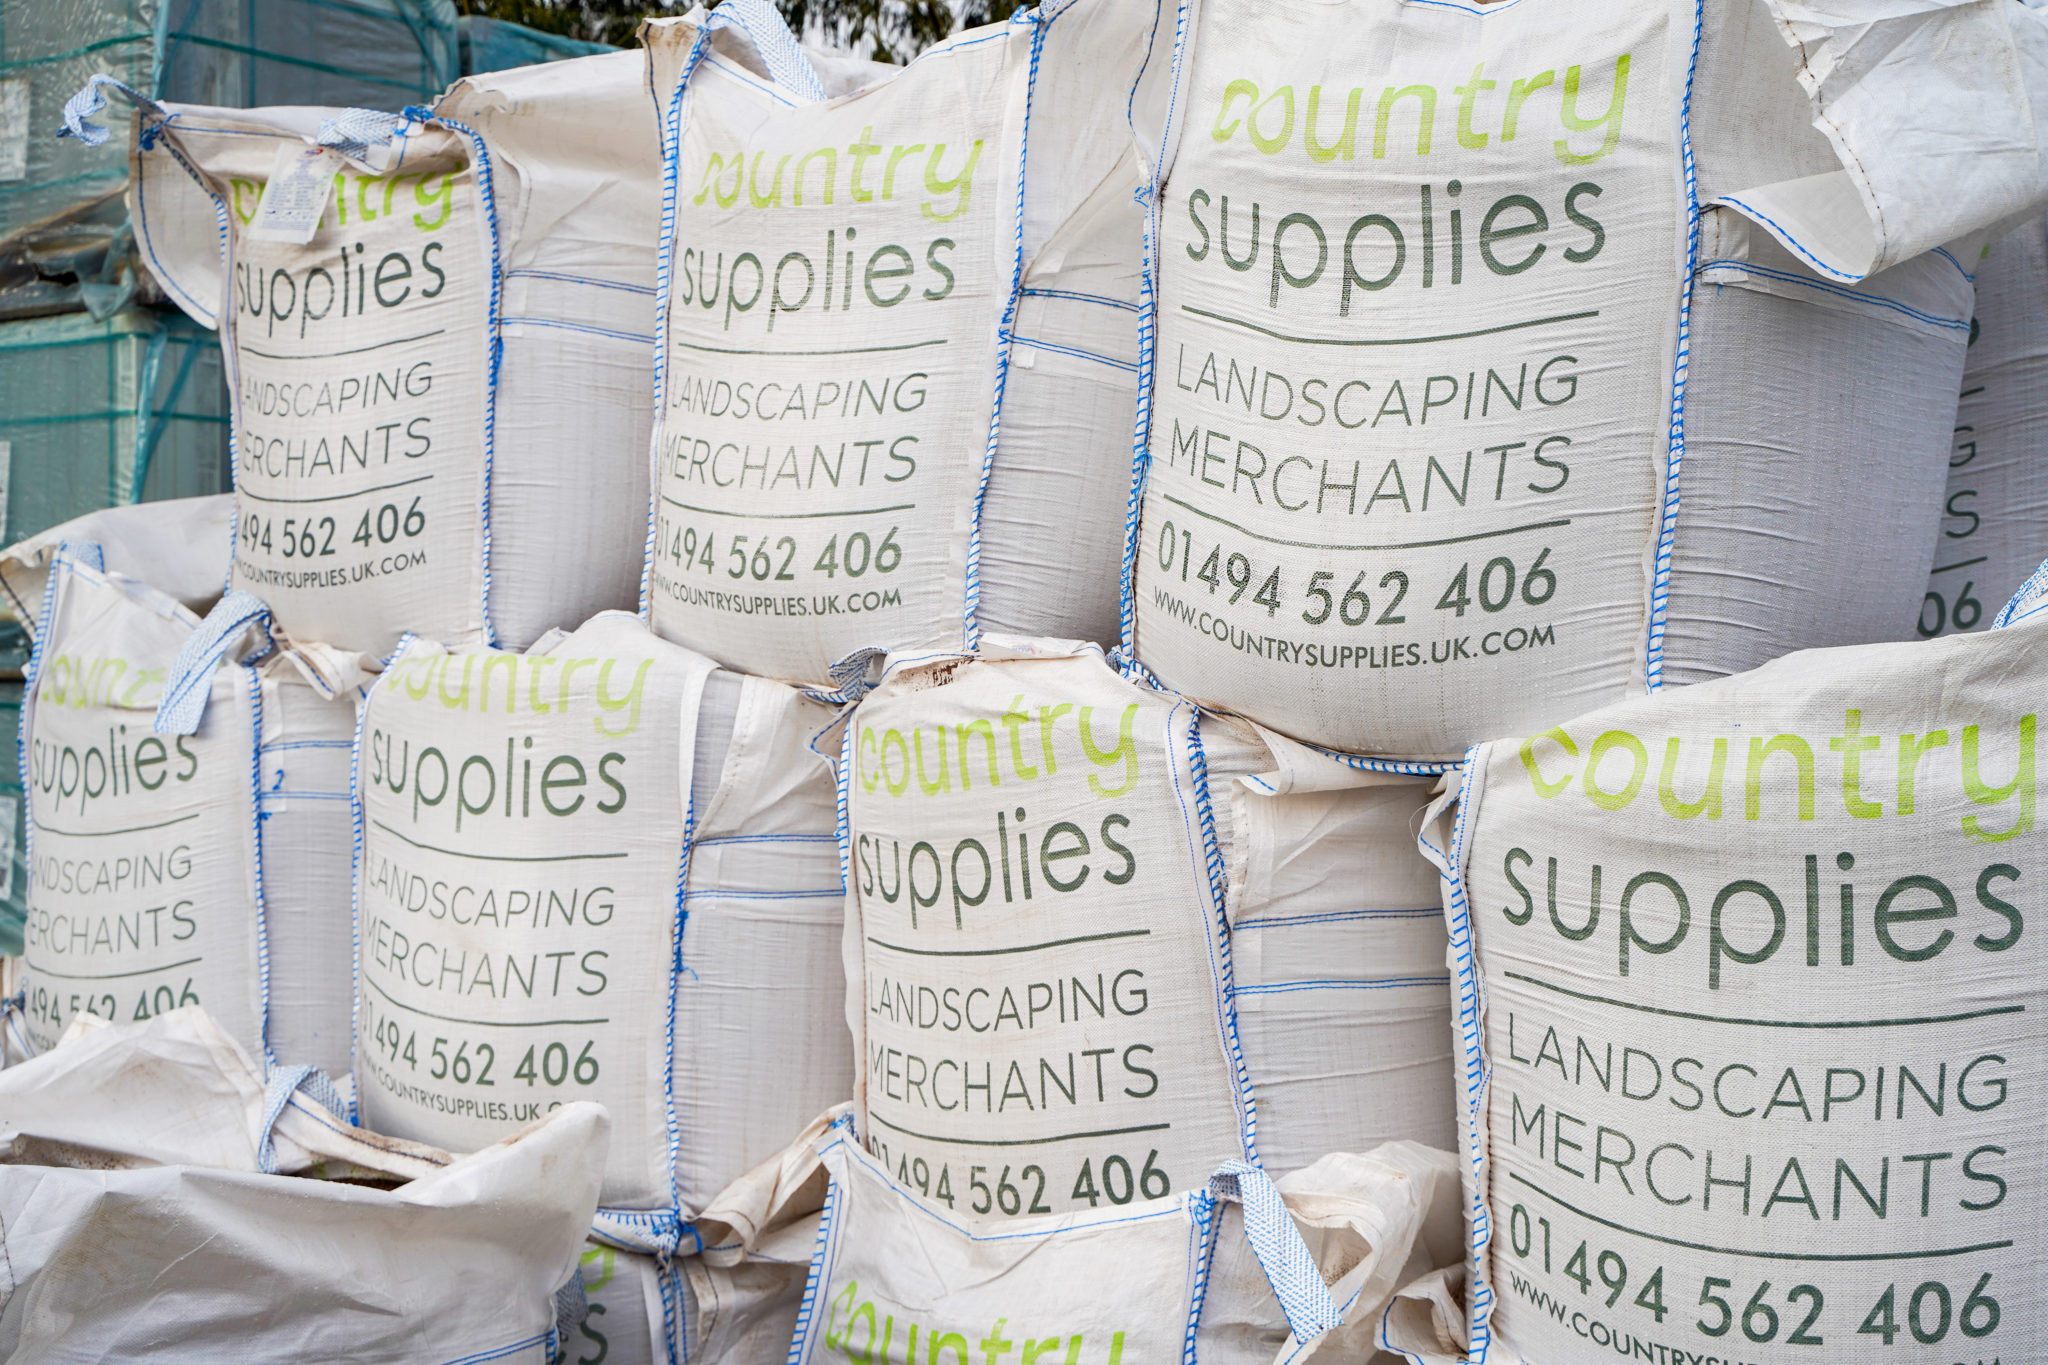 Country Supplies all landscaping materials in High Wycombe